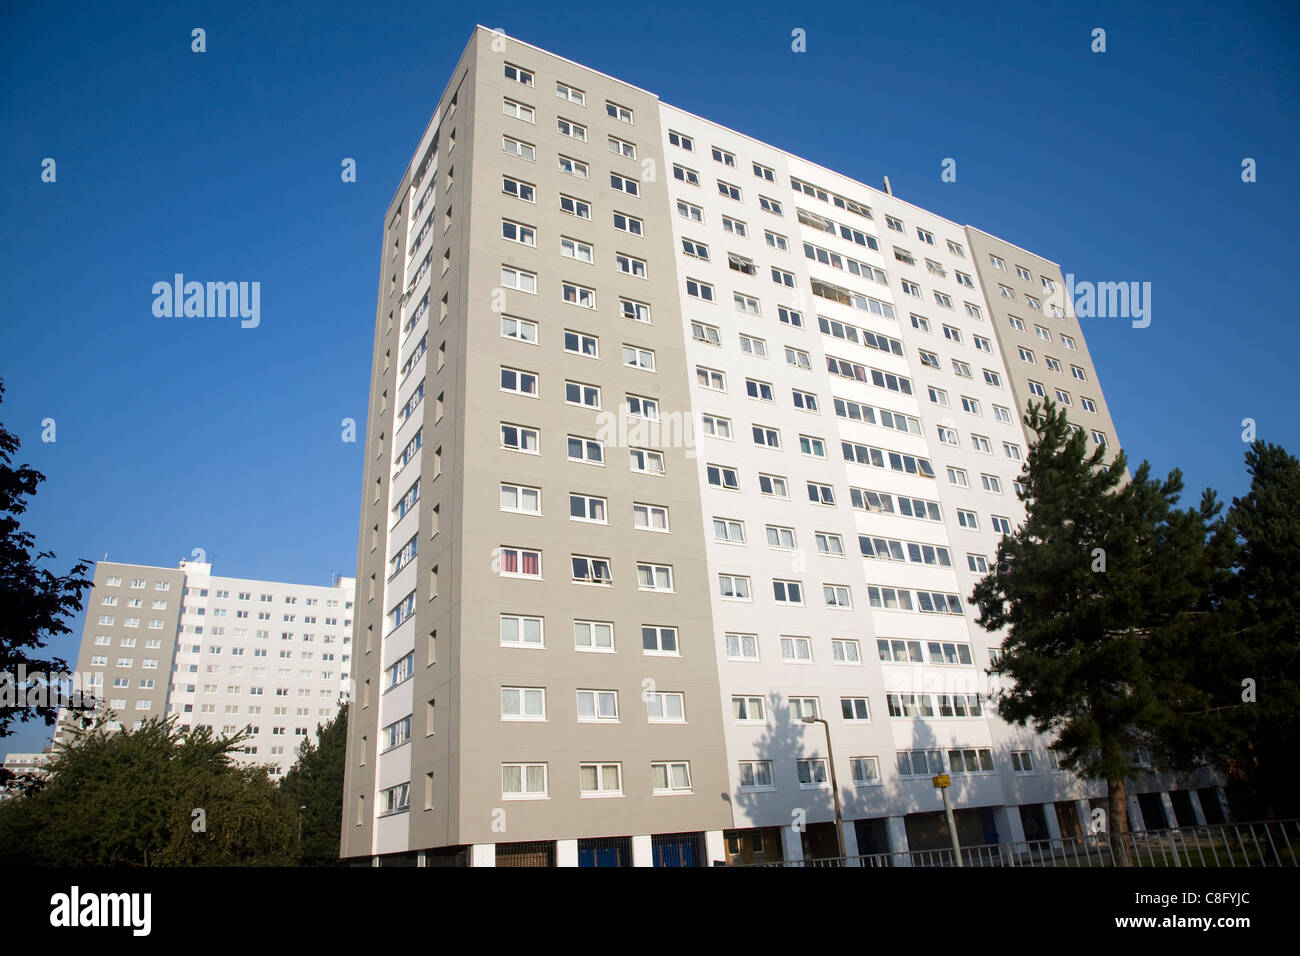 High rise inner city flats, Anlaby Road, Hull, Yorkshire, England Stock Photo